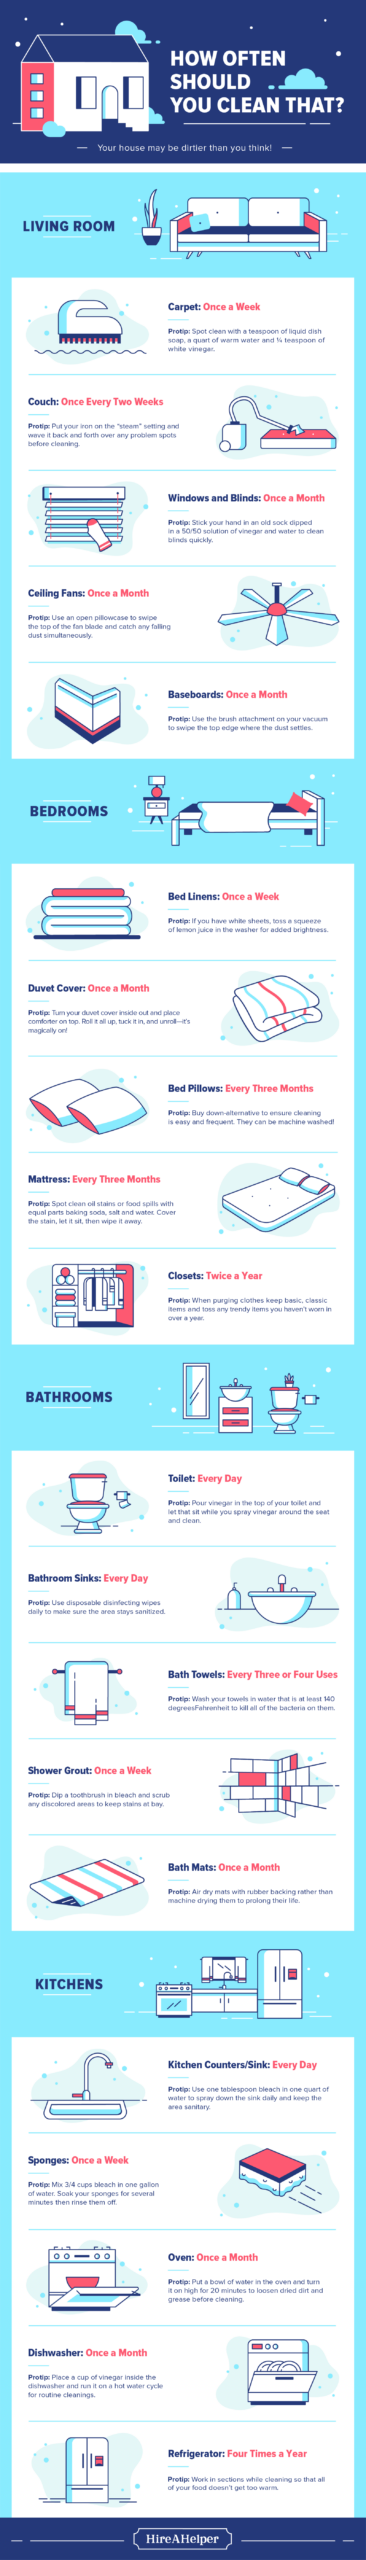 https://a1clean.net/wp-content/uploads/2020/08/how-often-should-you-clean-these-household-items.png